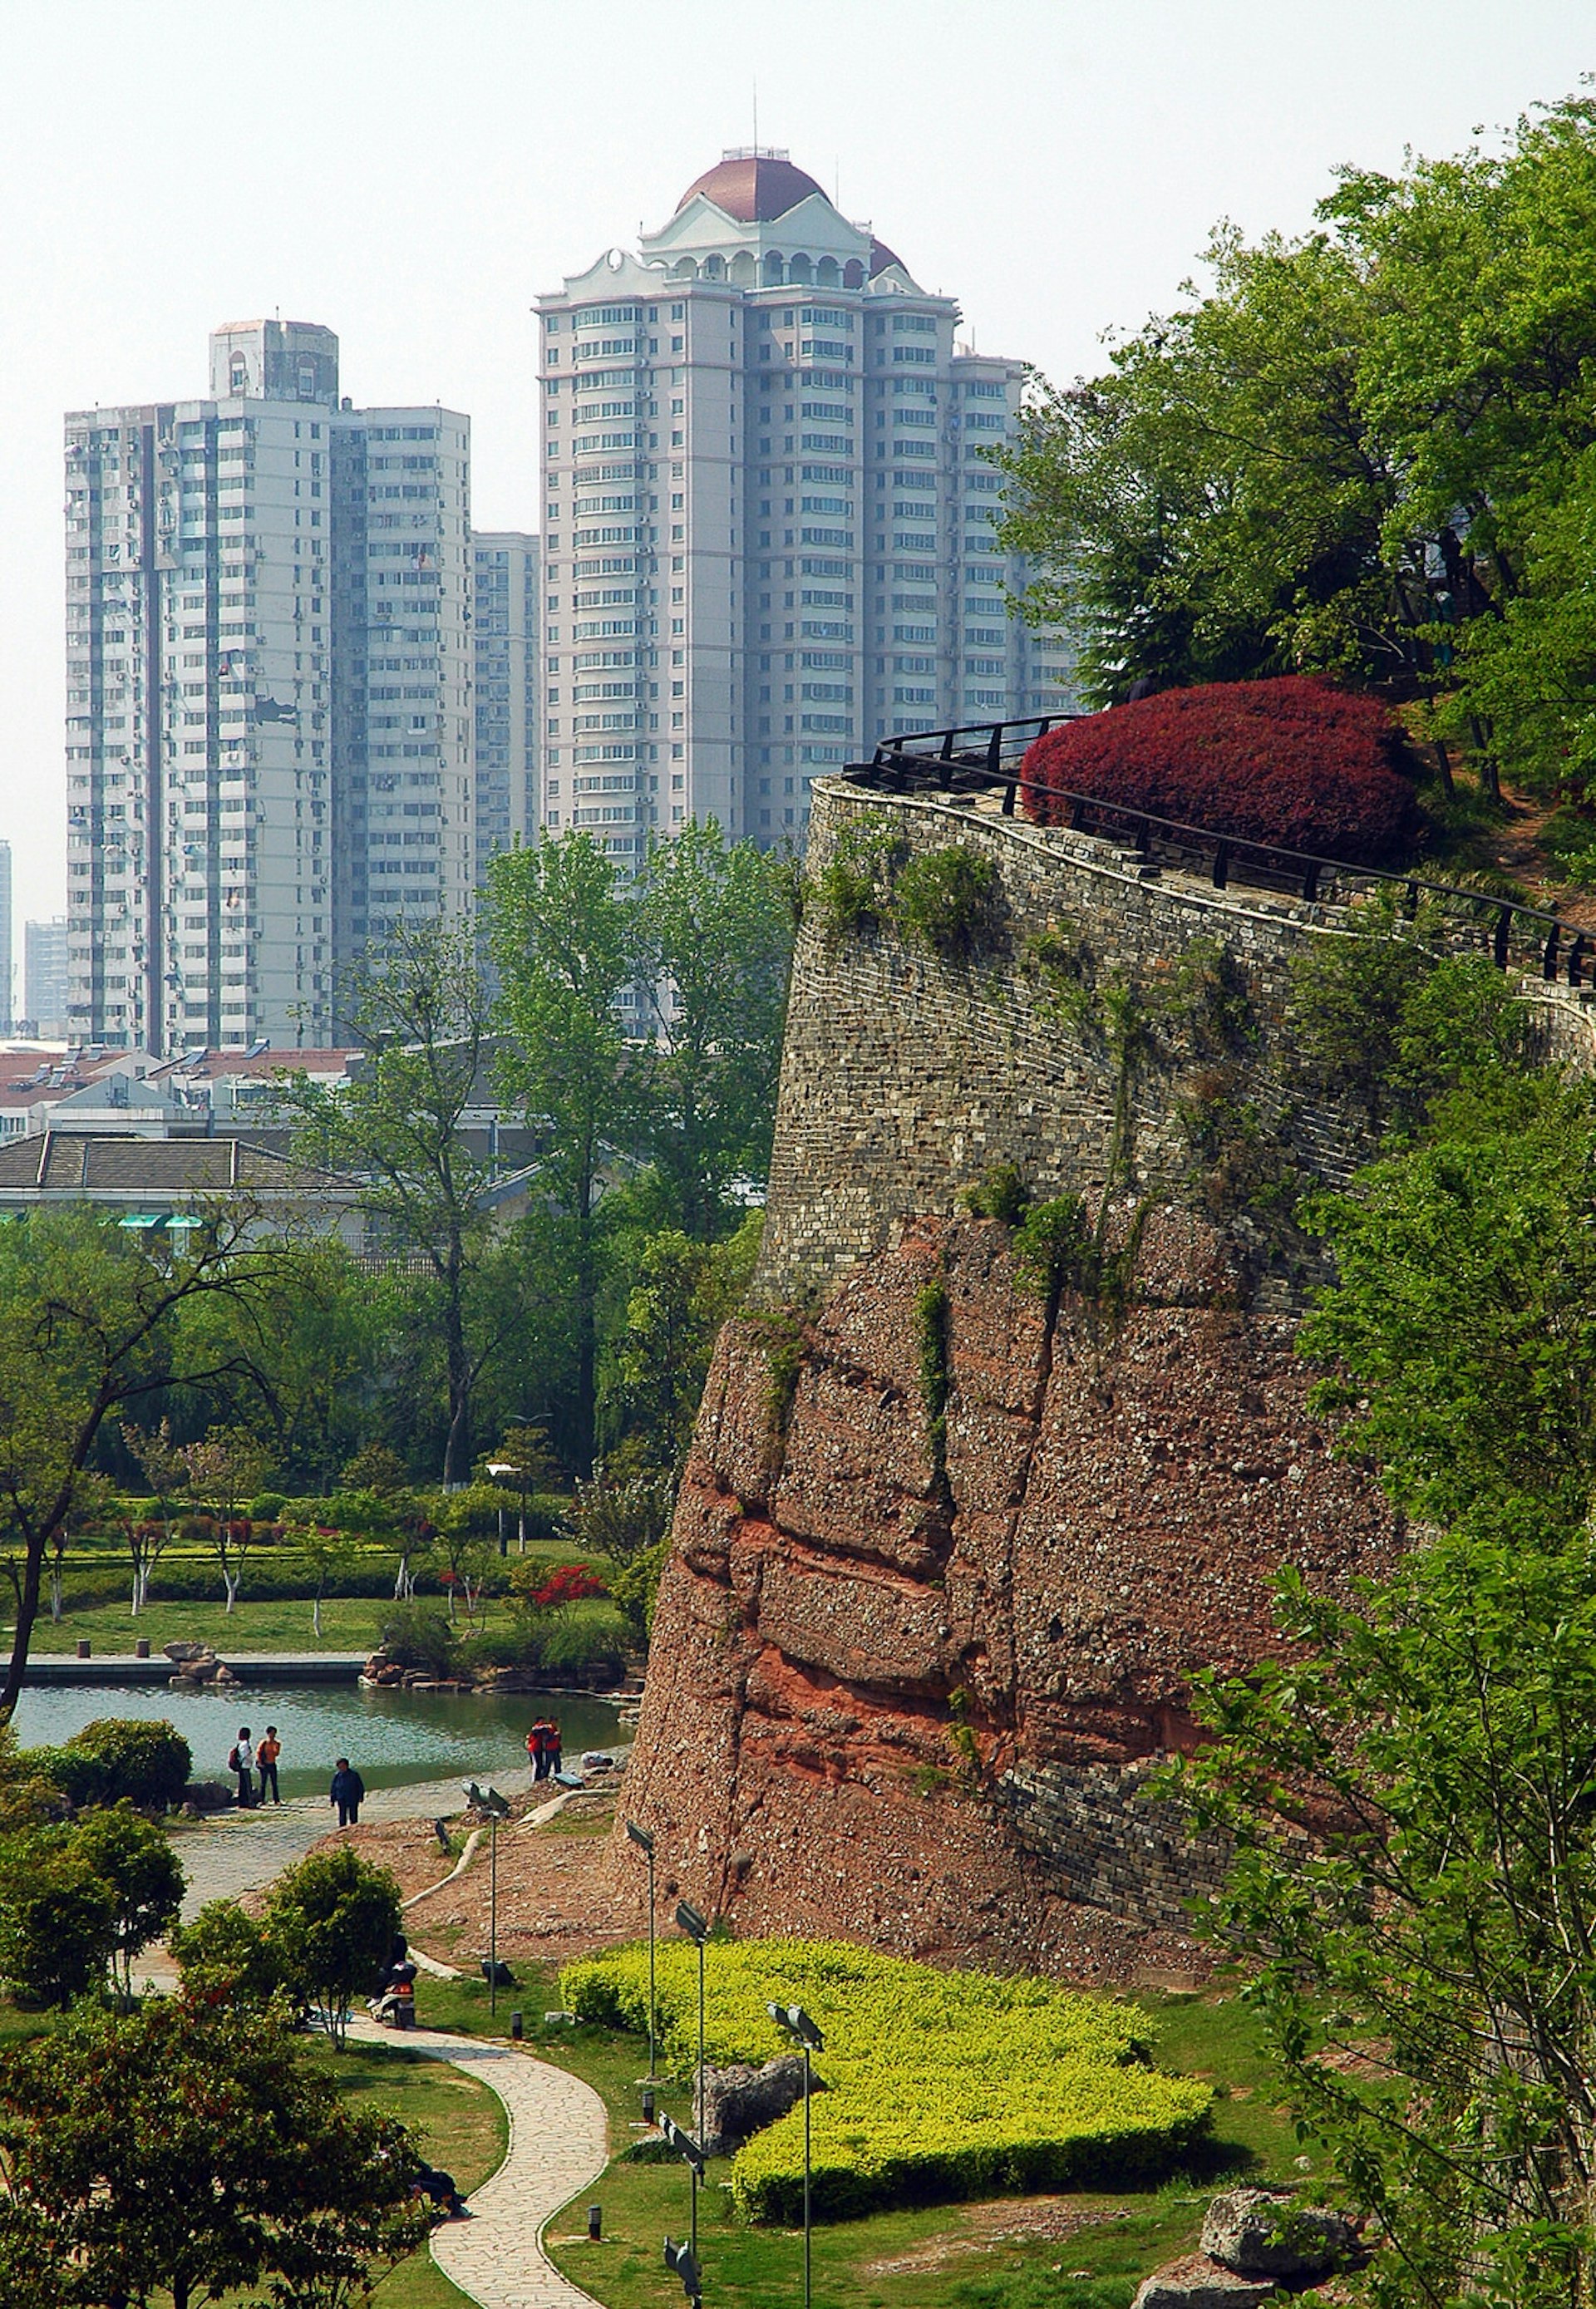 Unlike most Chinese walls, Nanjing's wall is not perfectly symmetrical © Emperorderek / Getty